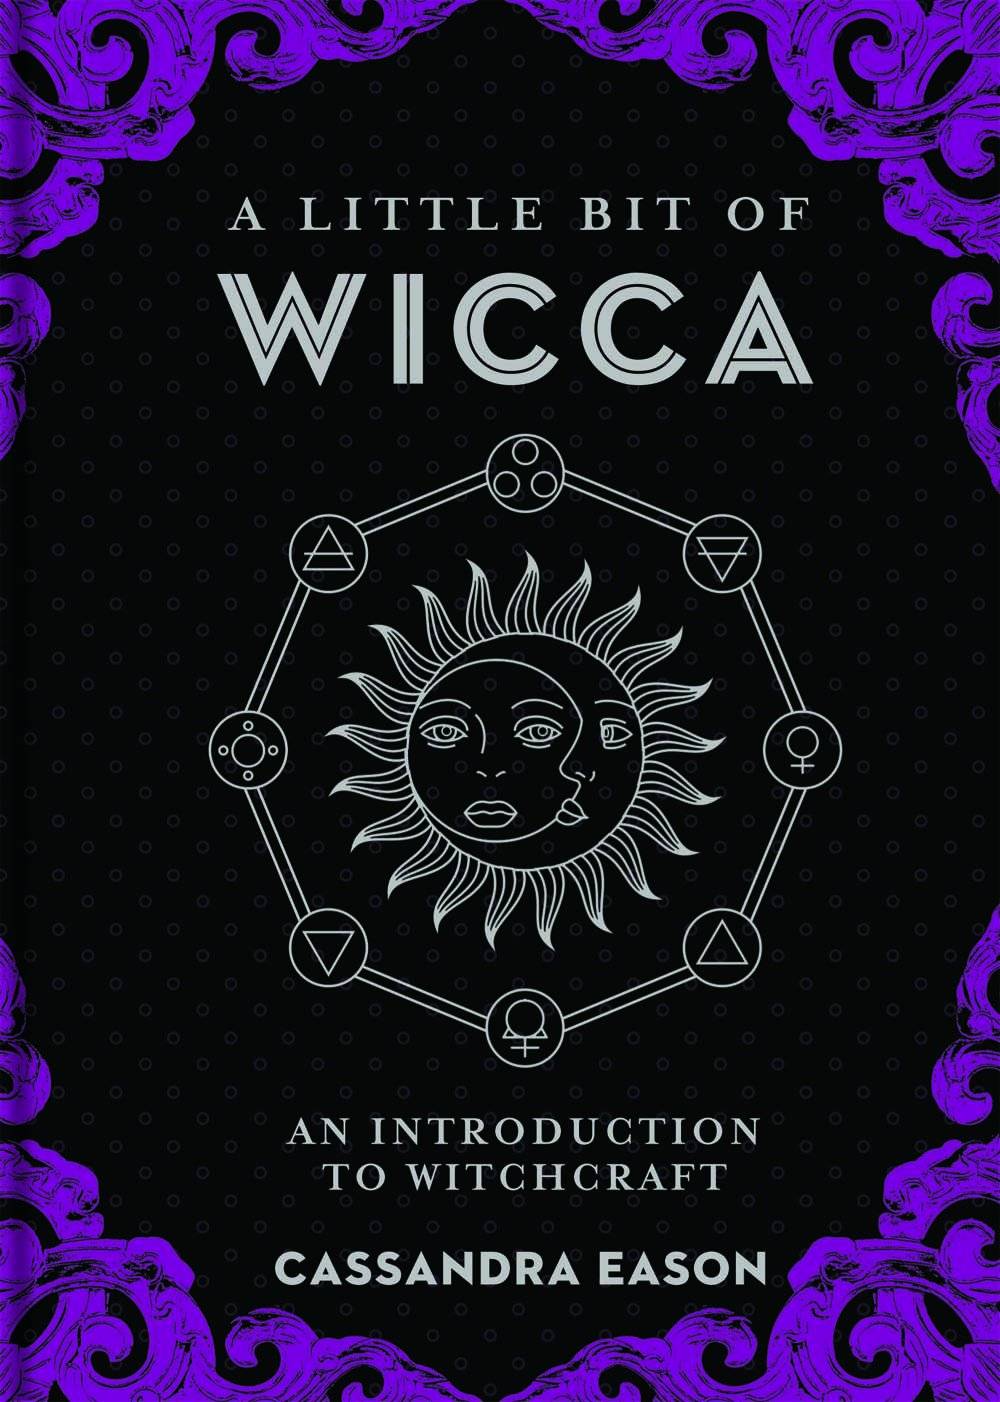 Little bit of wicca - an introduction to witchcraft